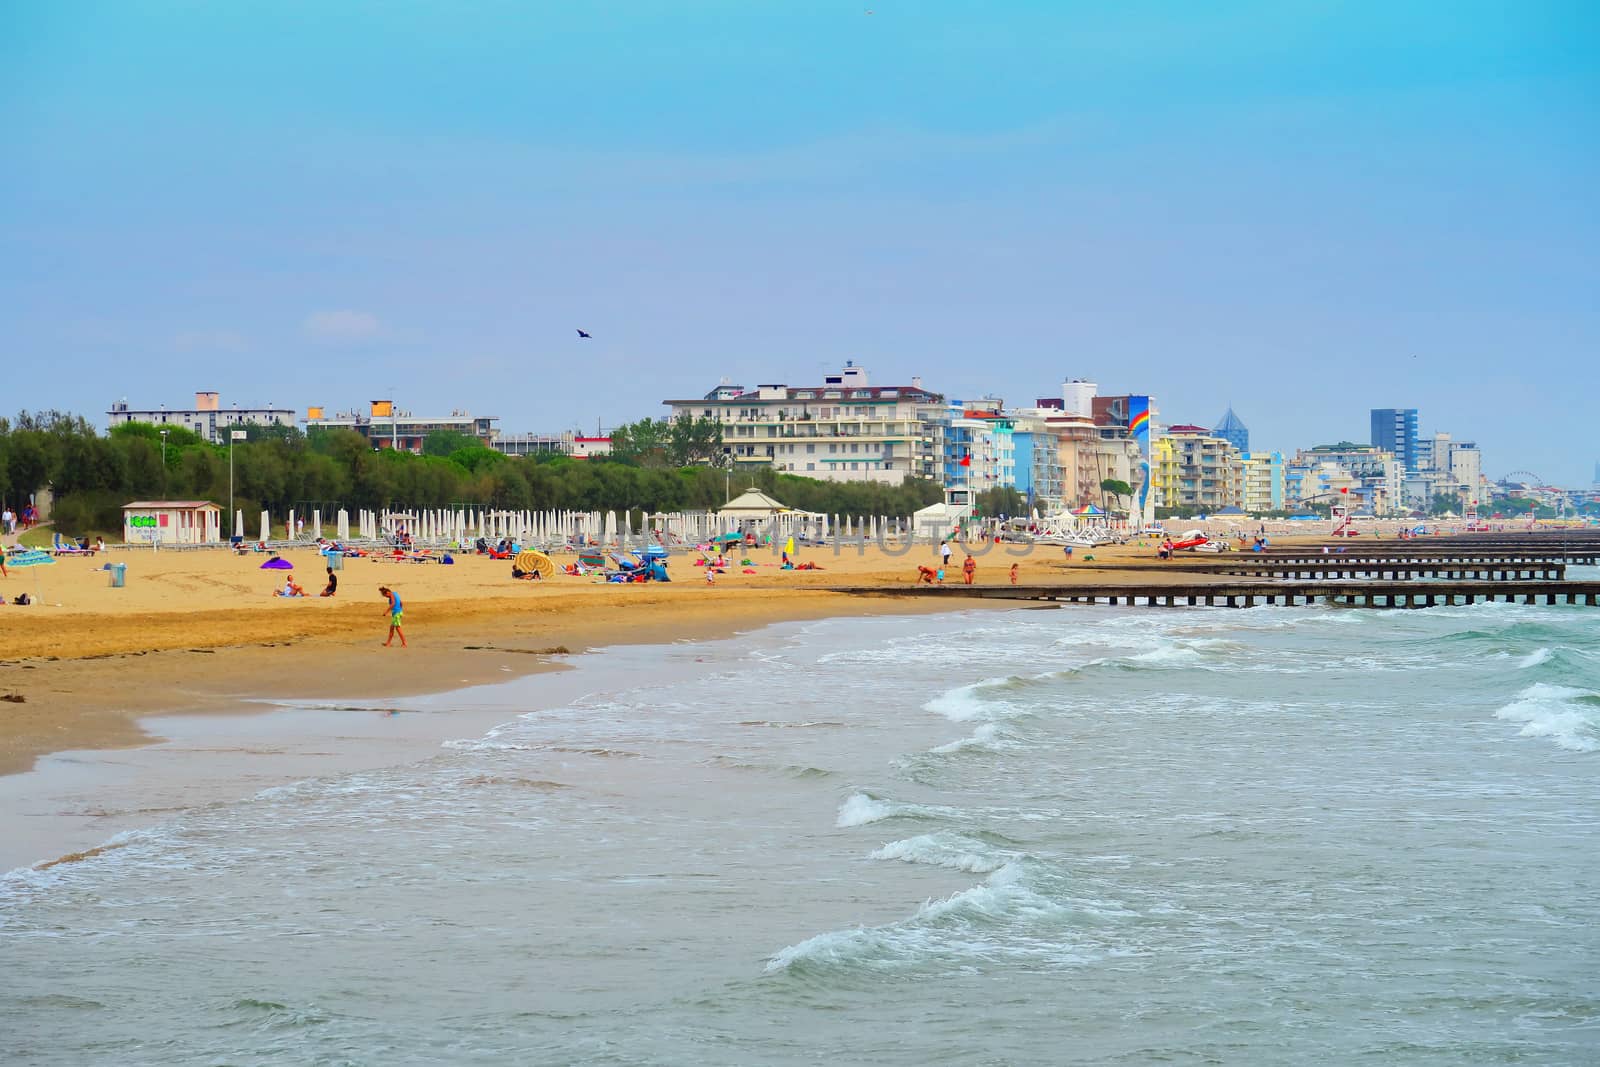 View of Jesolo, Italy, from the beach